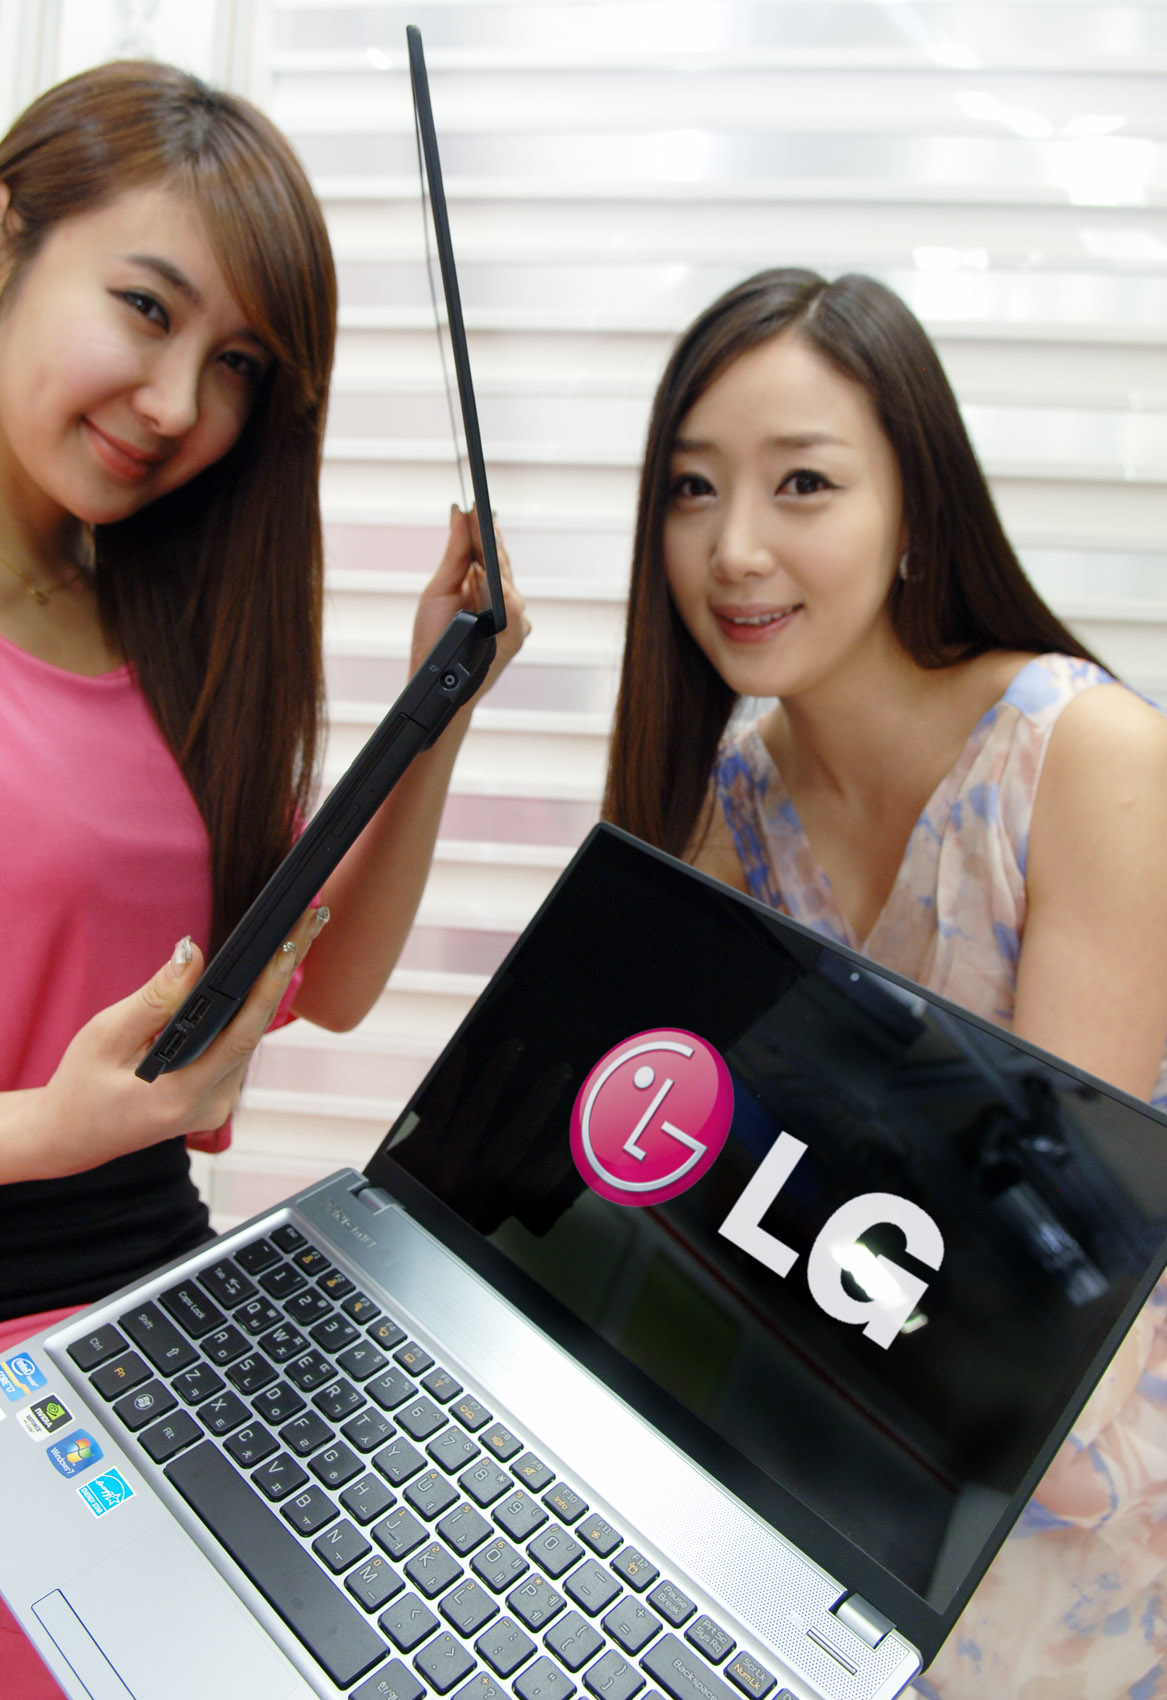 a couple of pretty young ladies holding up an lg laptop